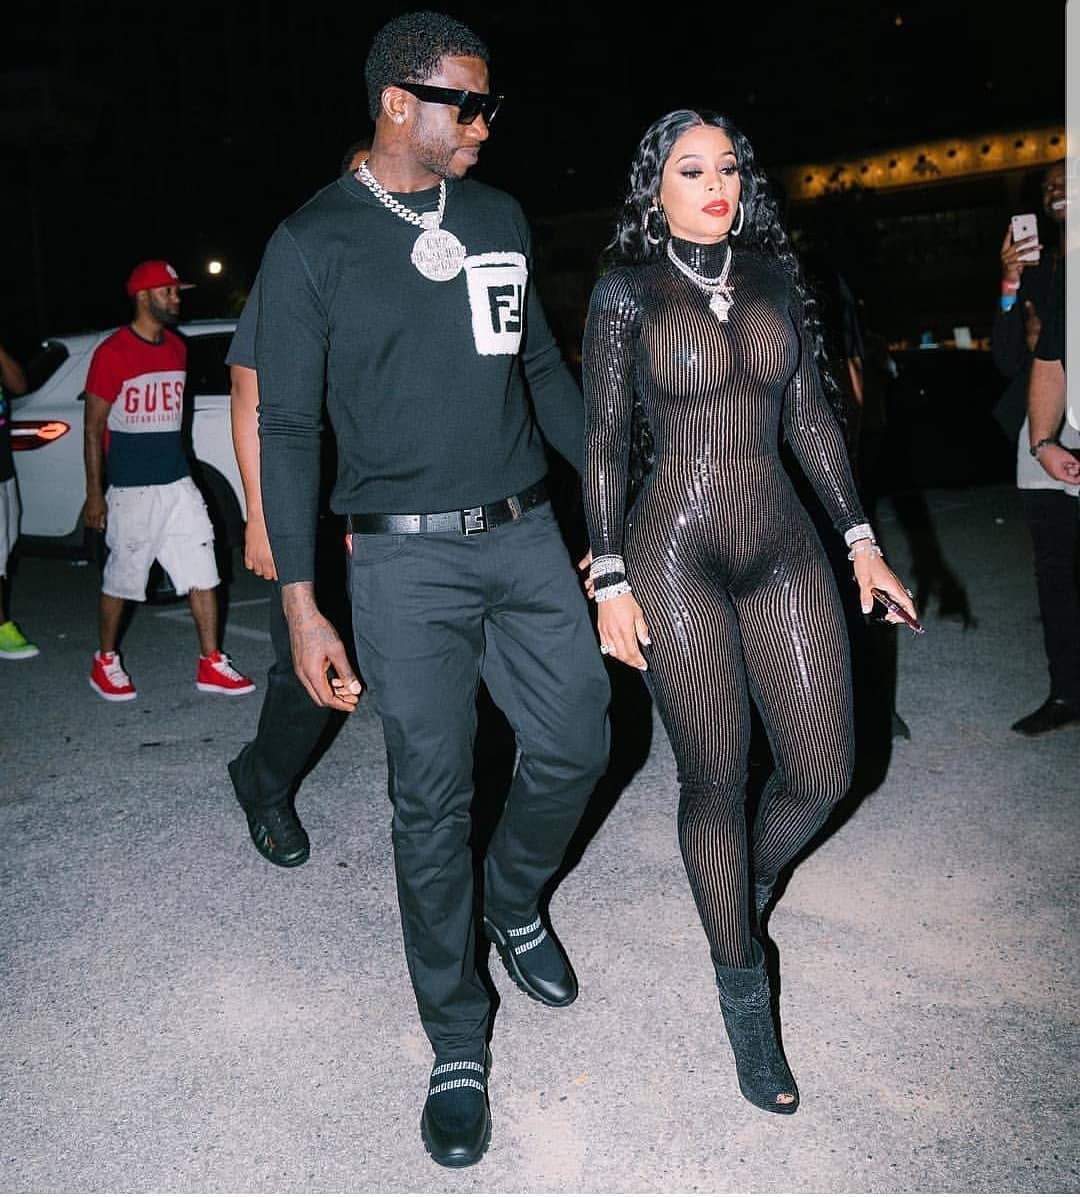 photo) See Guccimane Wife, Keyshia Picture That Got Fans Talking -  Celebrities - Nigeria